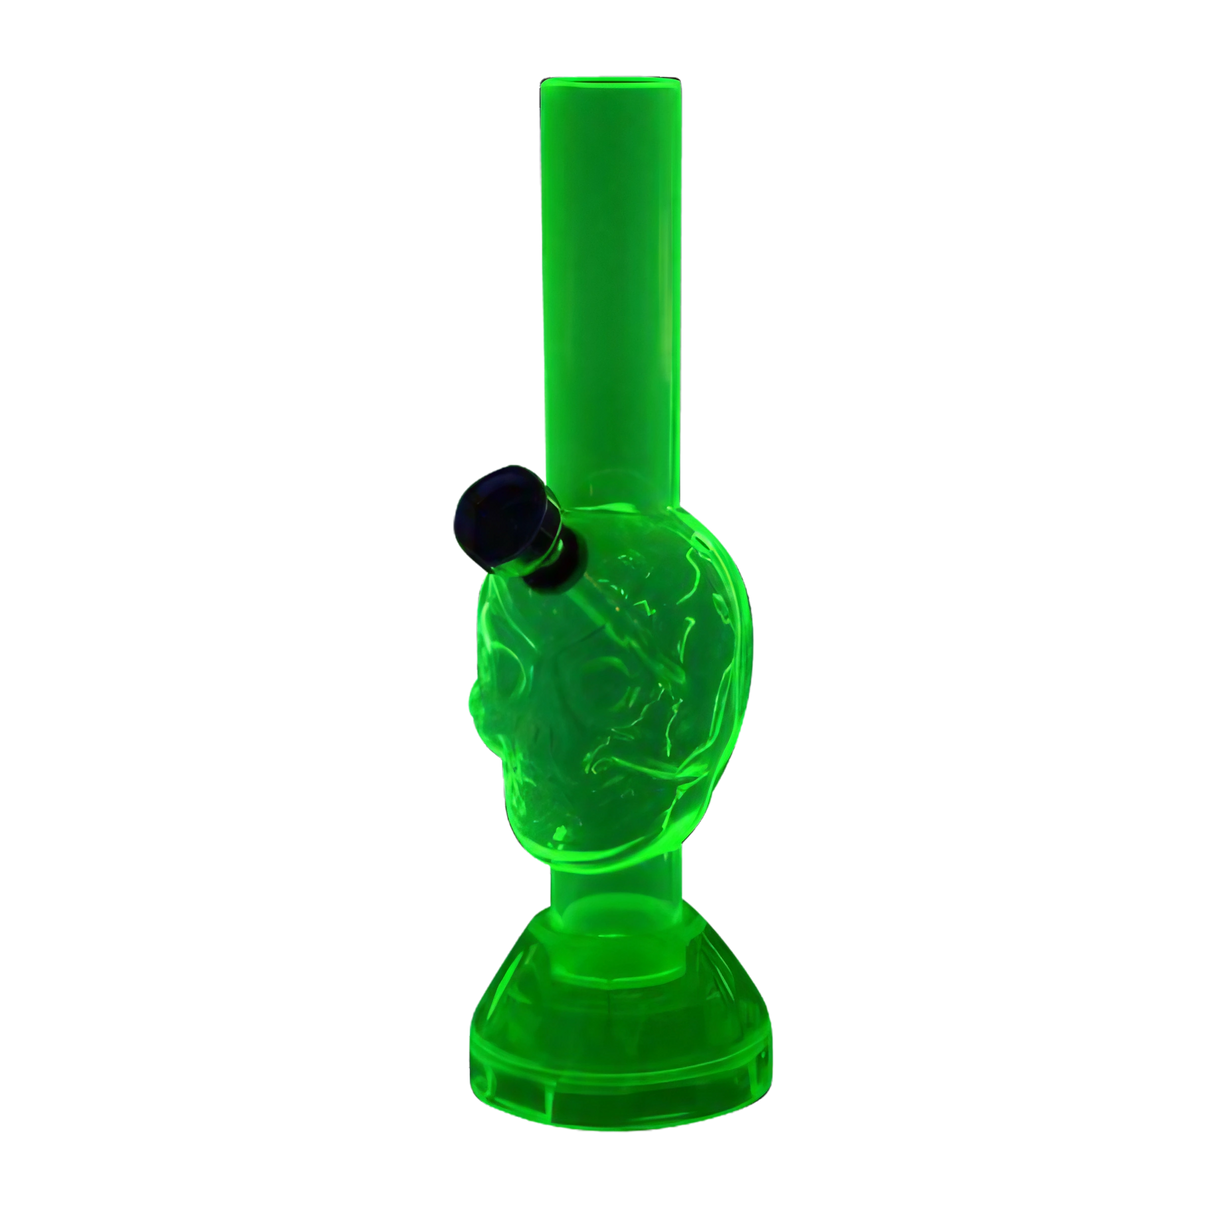 7" Mini Acrylic Skull Water Pipe in Green with Built-in Grinder Base, Side View